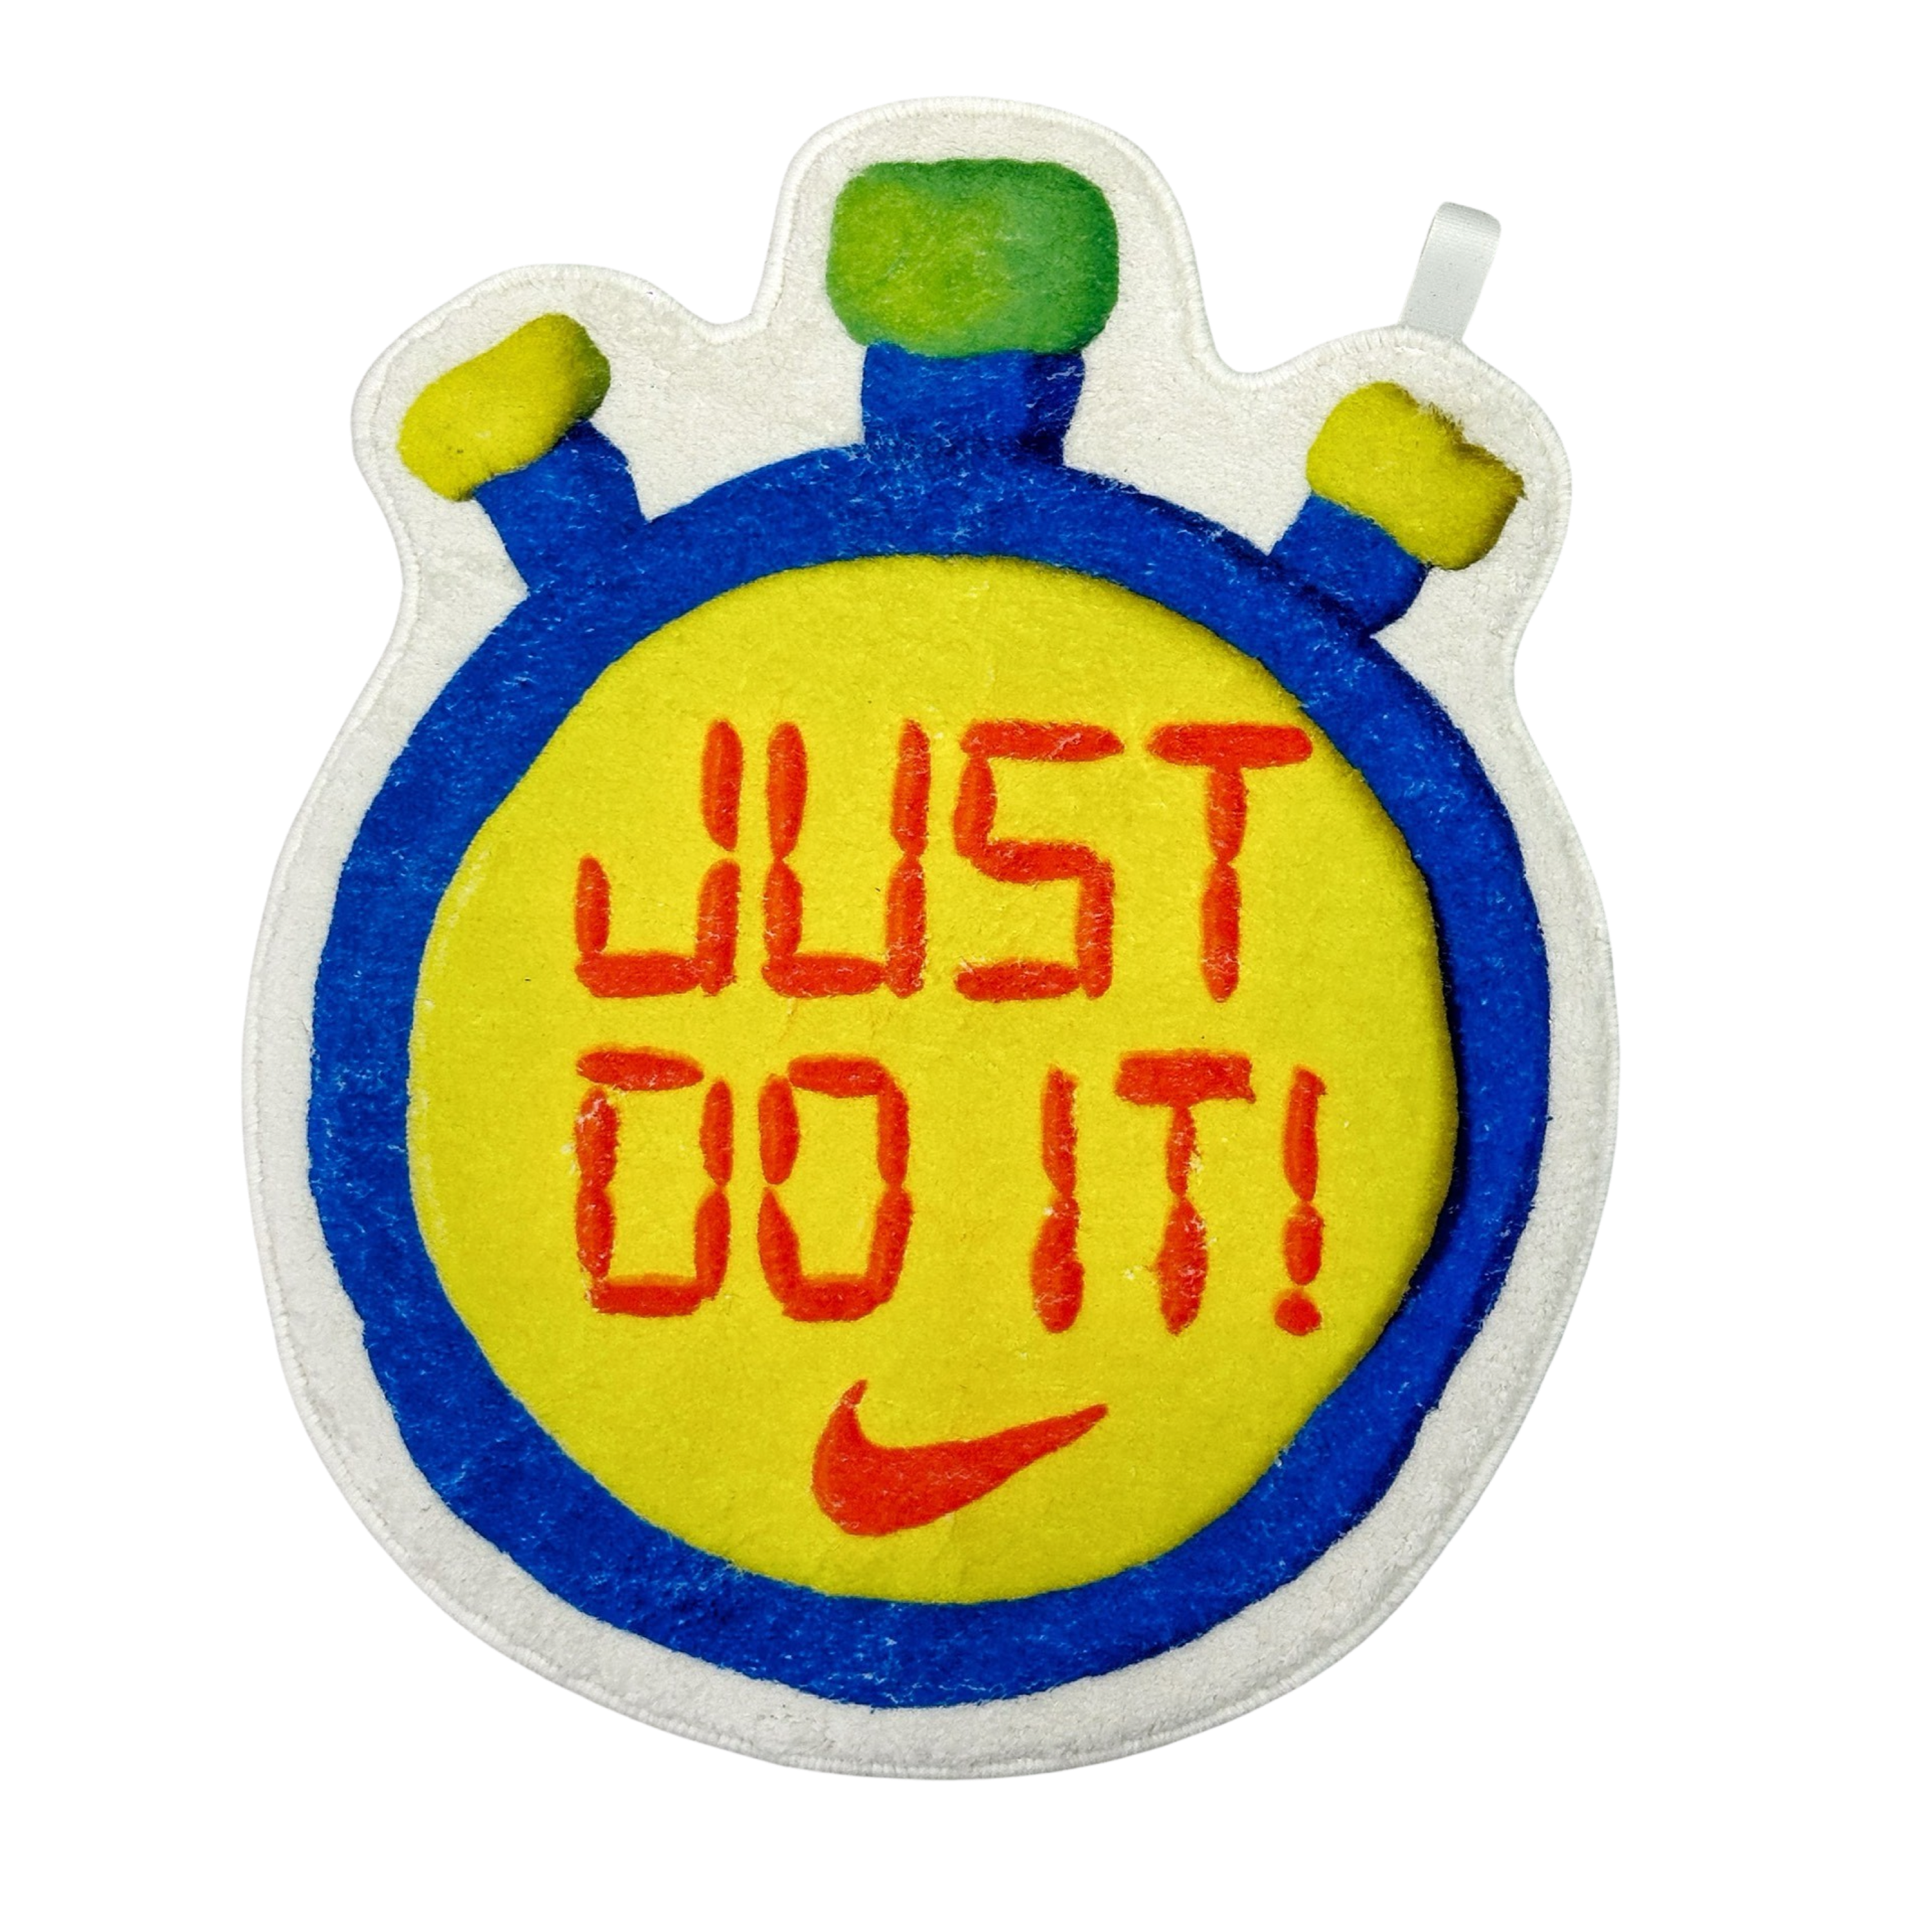 Nike Exclusive “Just Do it” Rug